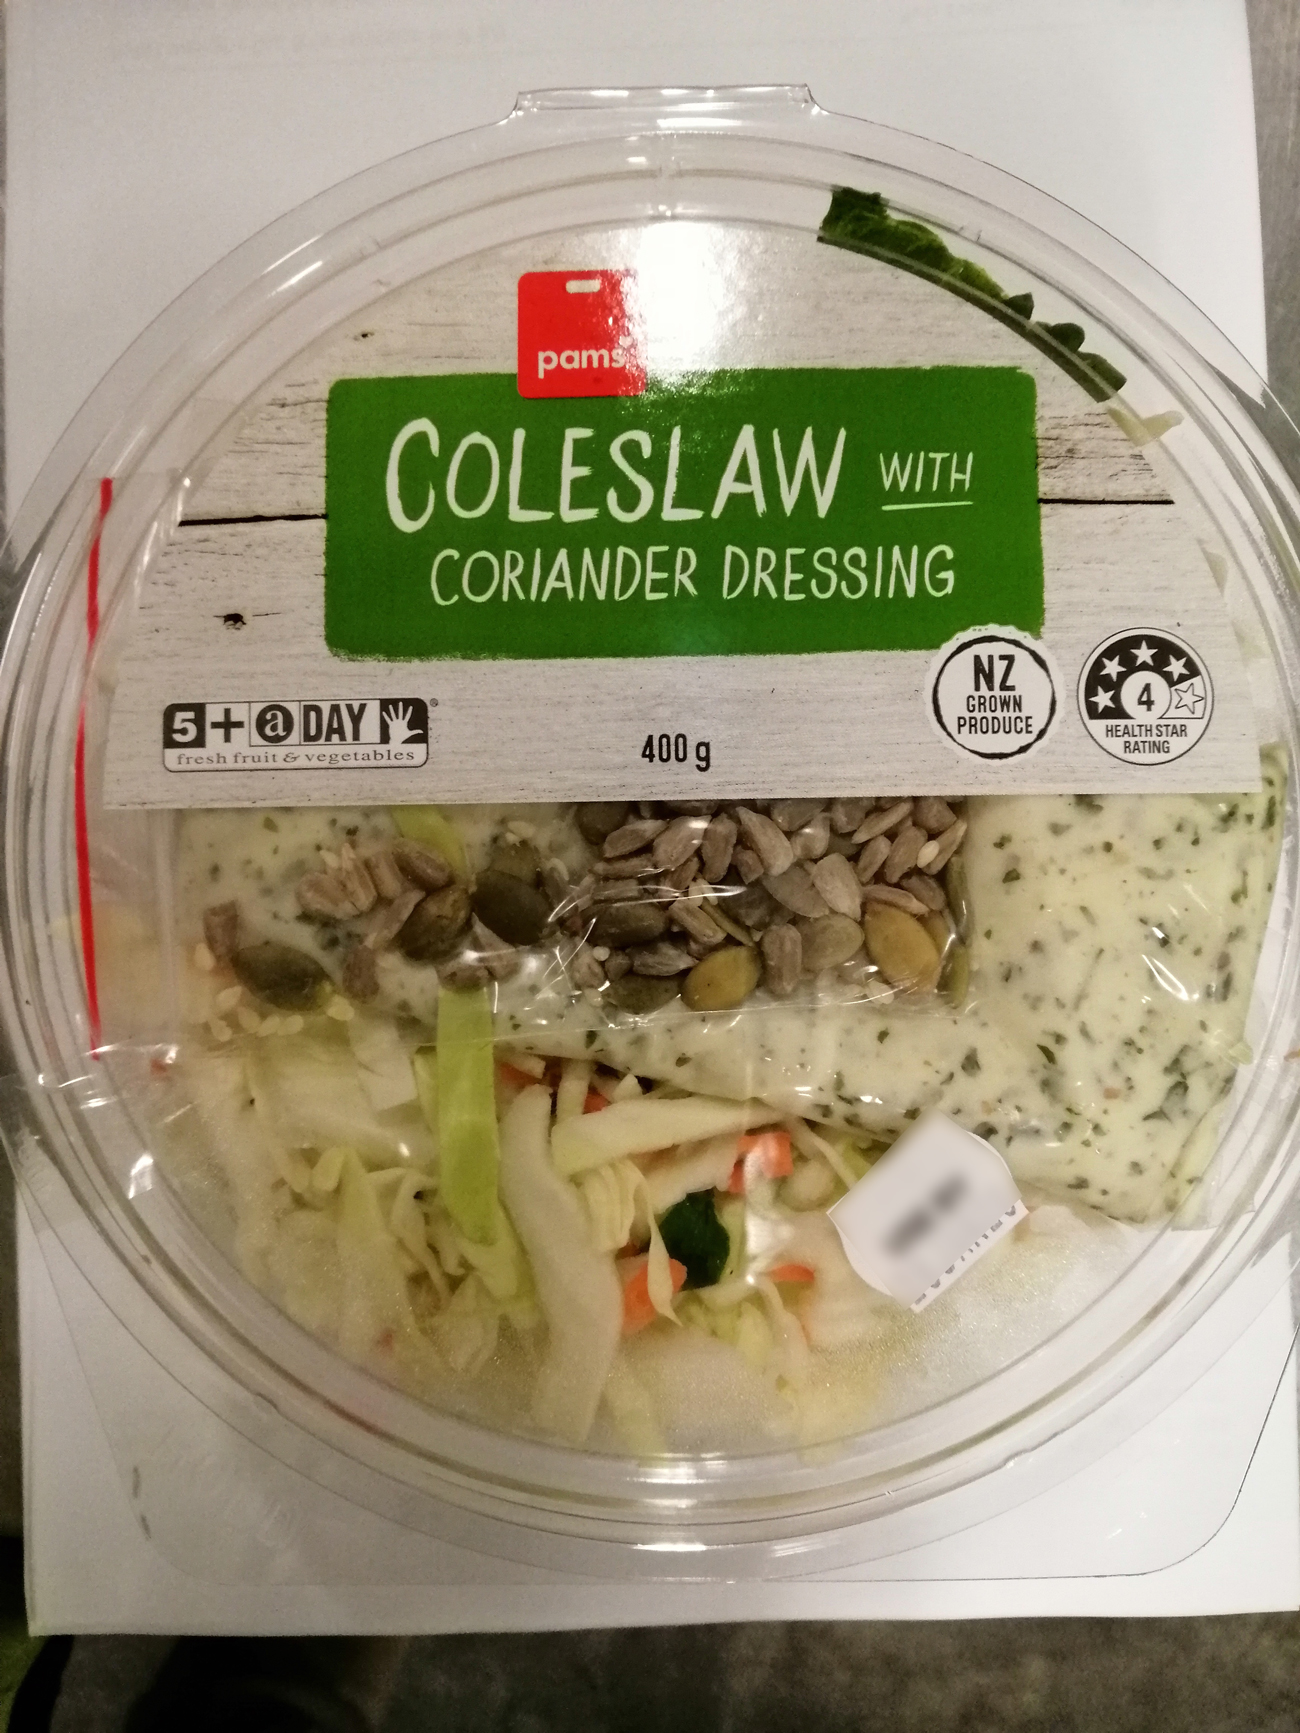 Photo of Pams brand Coleslaw with Coriander Dressing (400g) in a plastic container